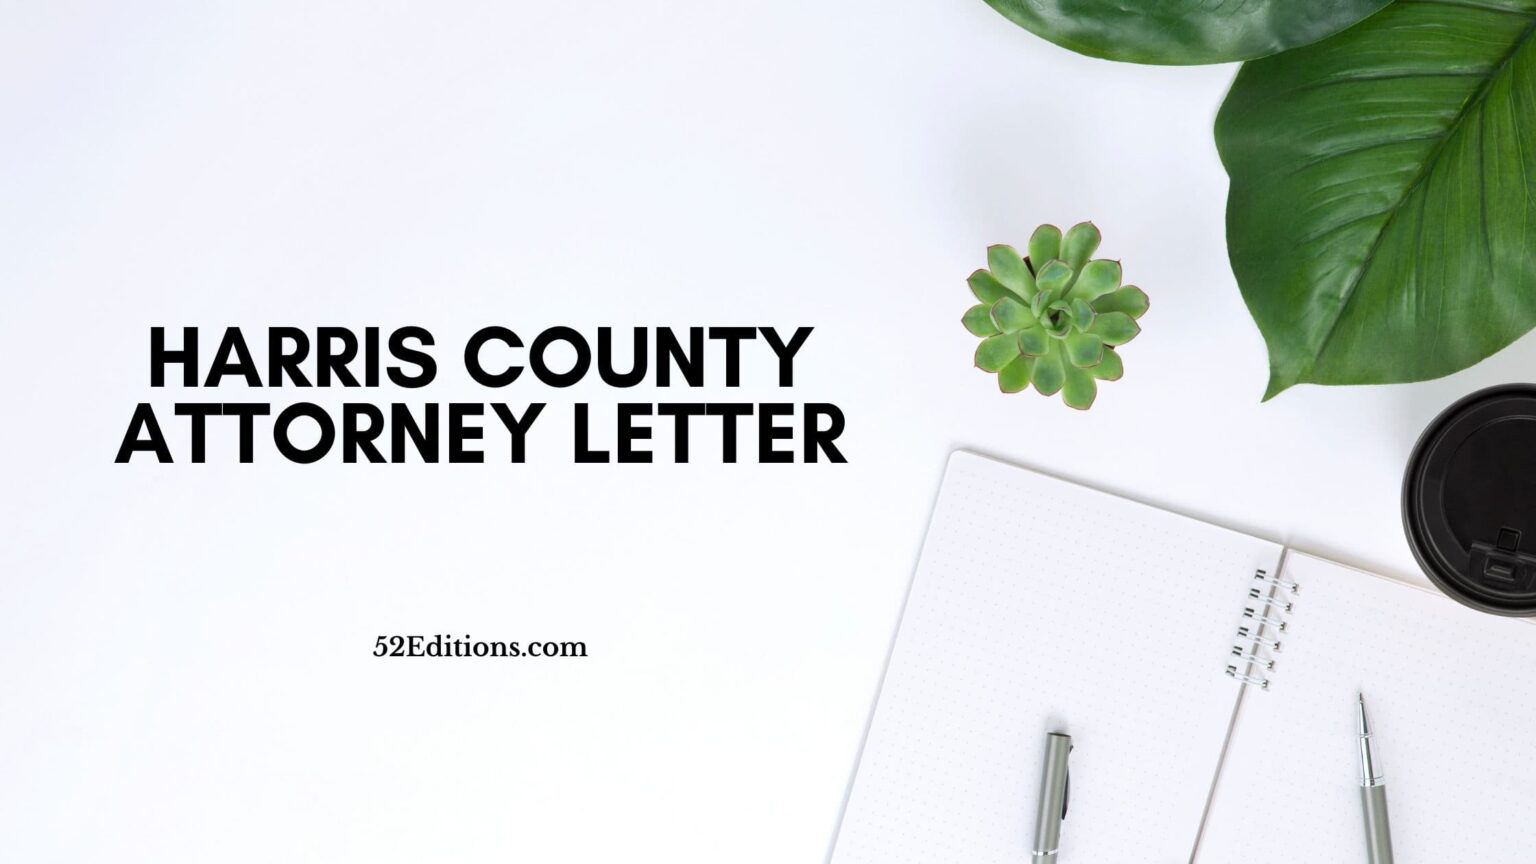 Harris County Attorney Letter // Get FREE Letter Templates (Print or